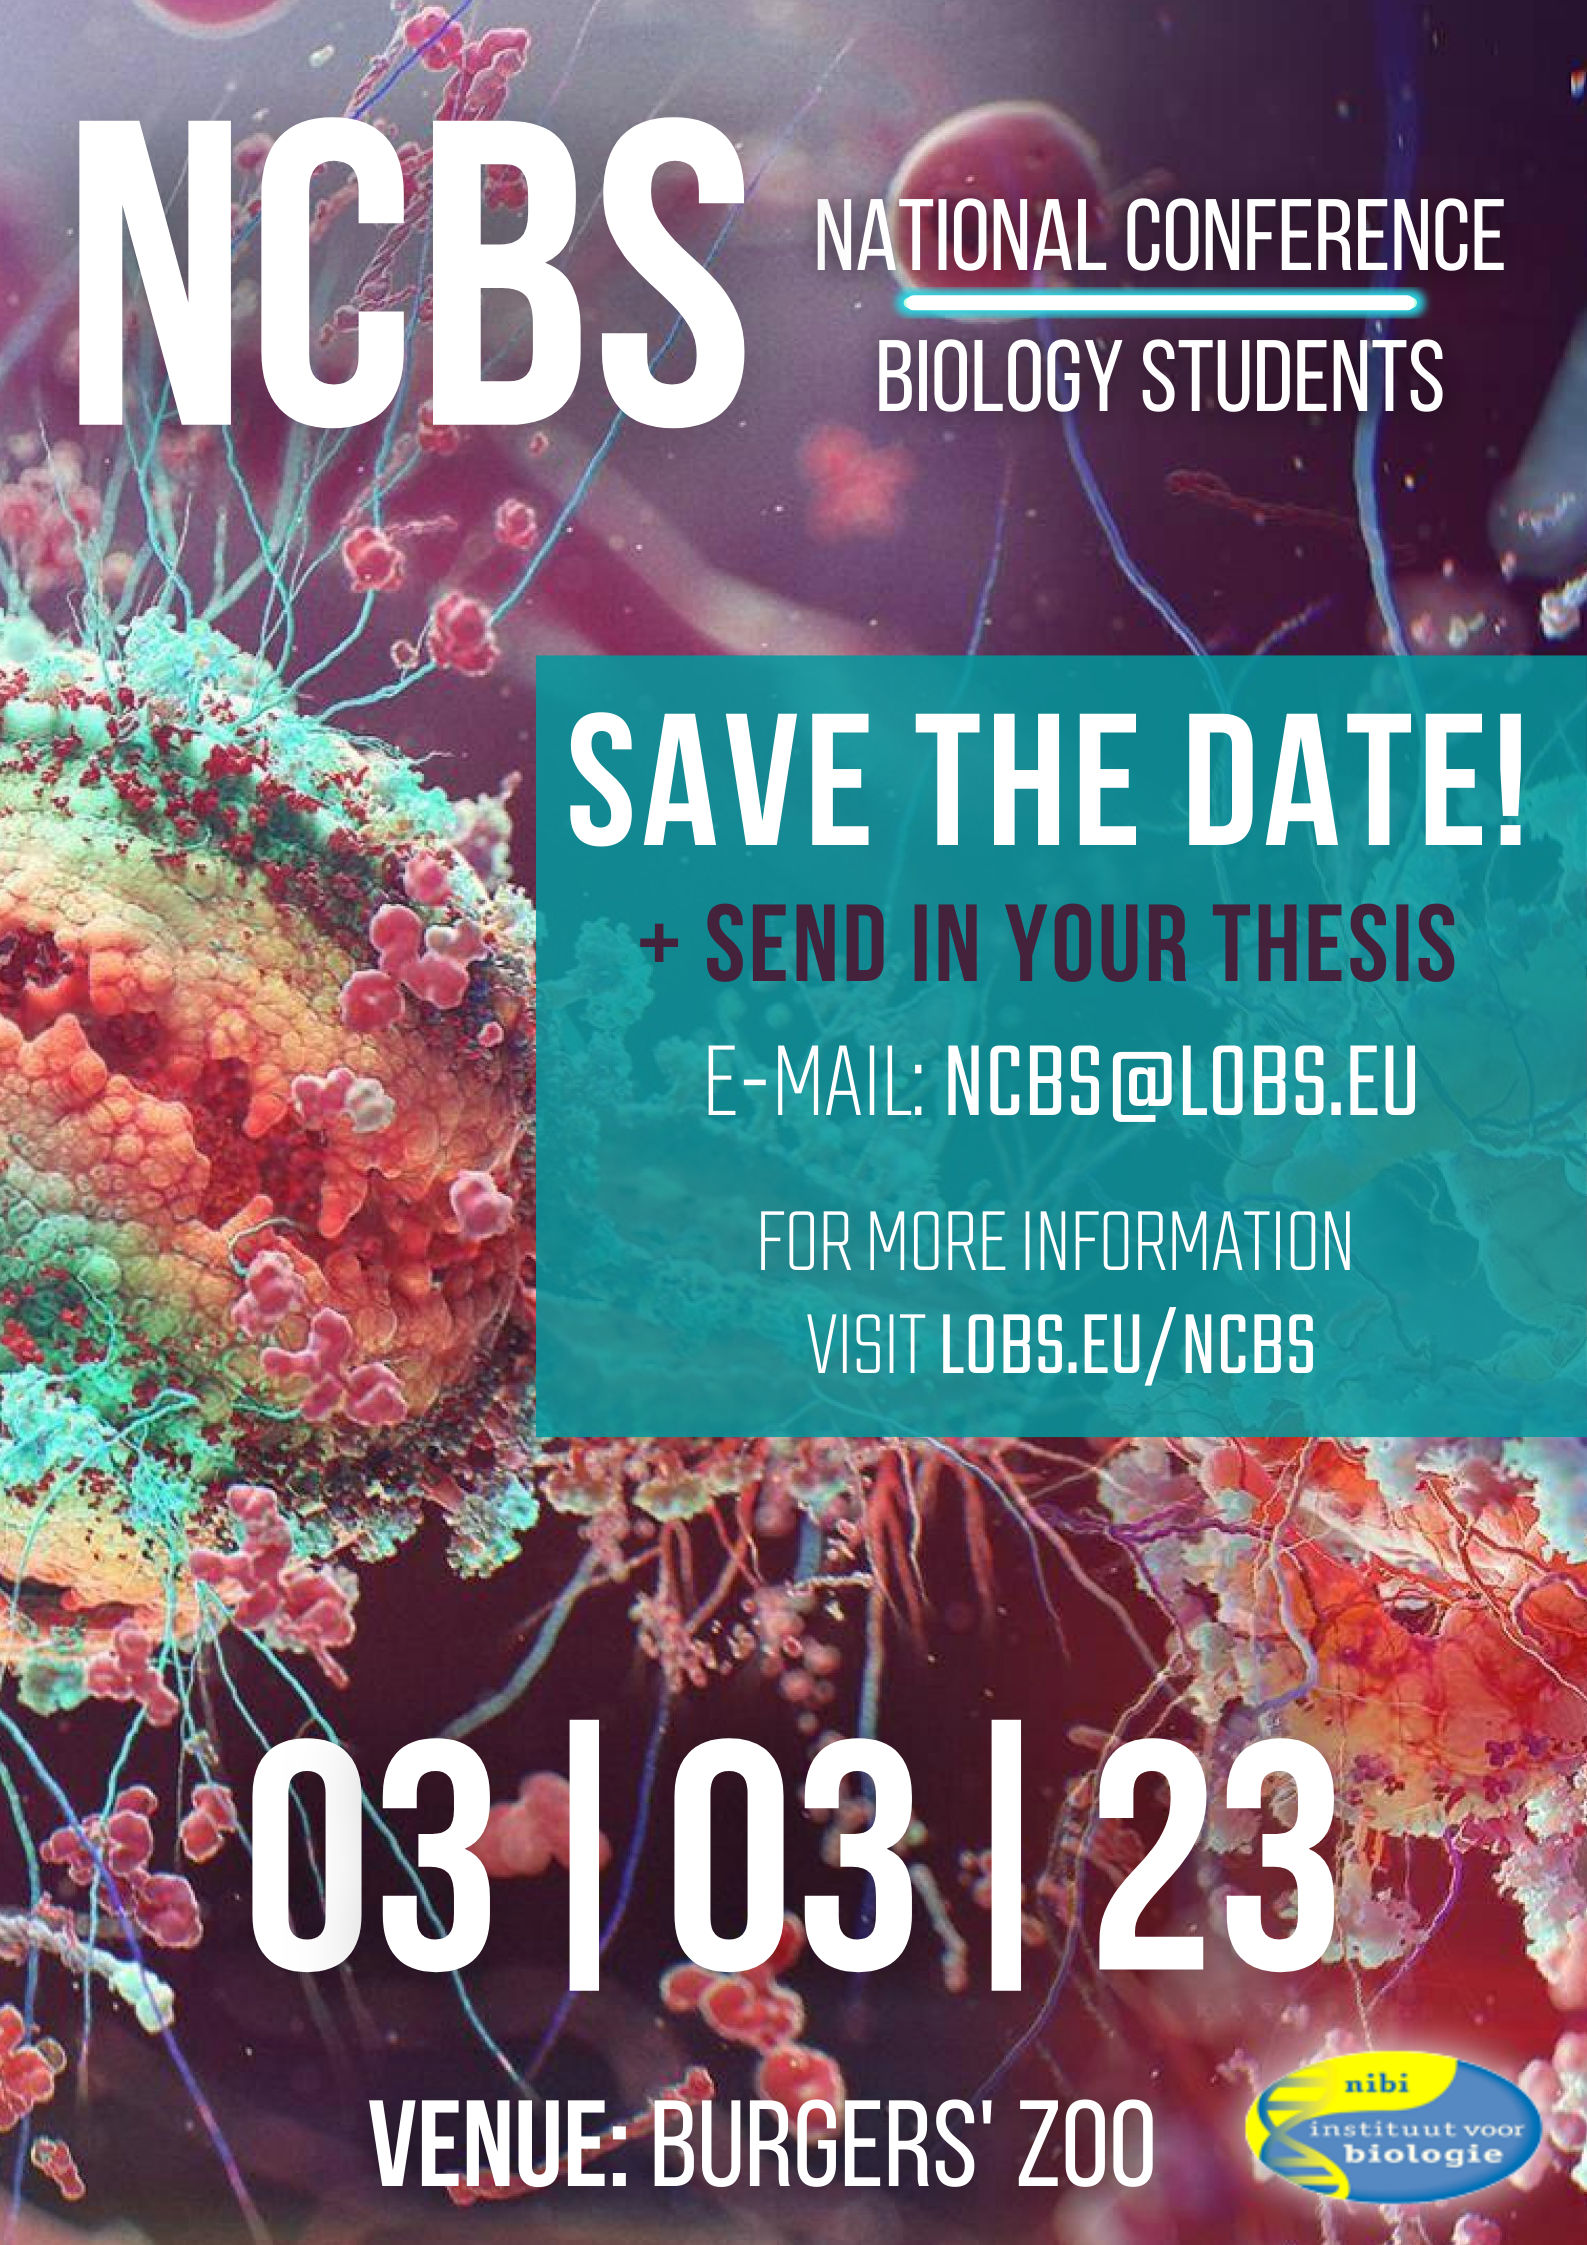 Save the date: NCBS